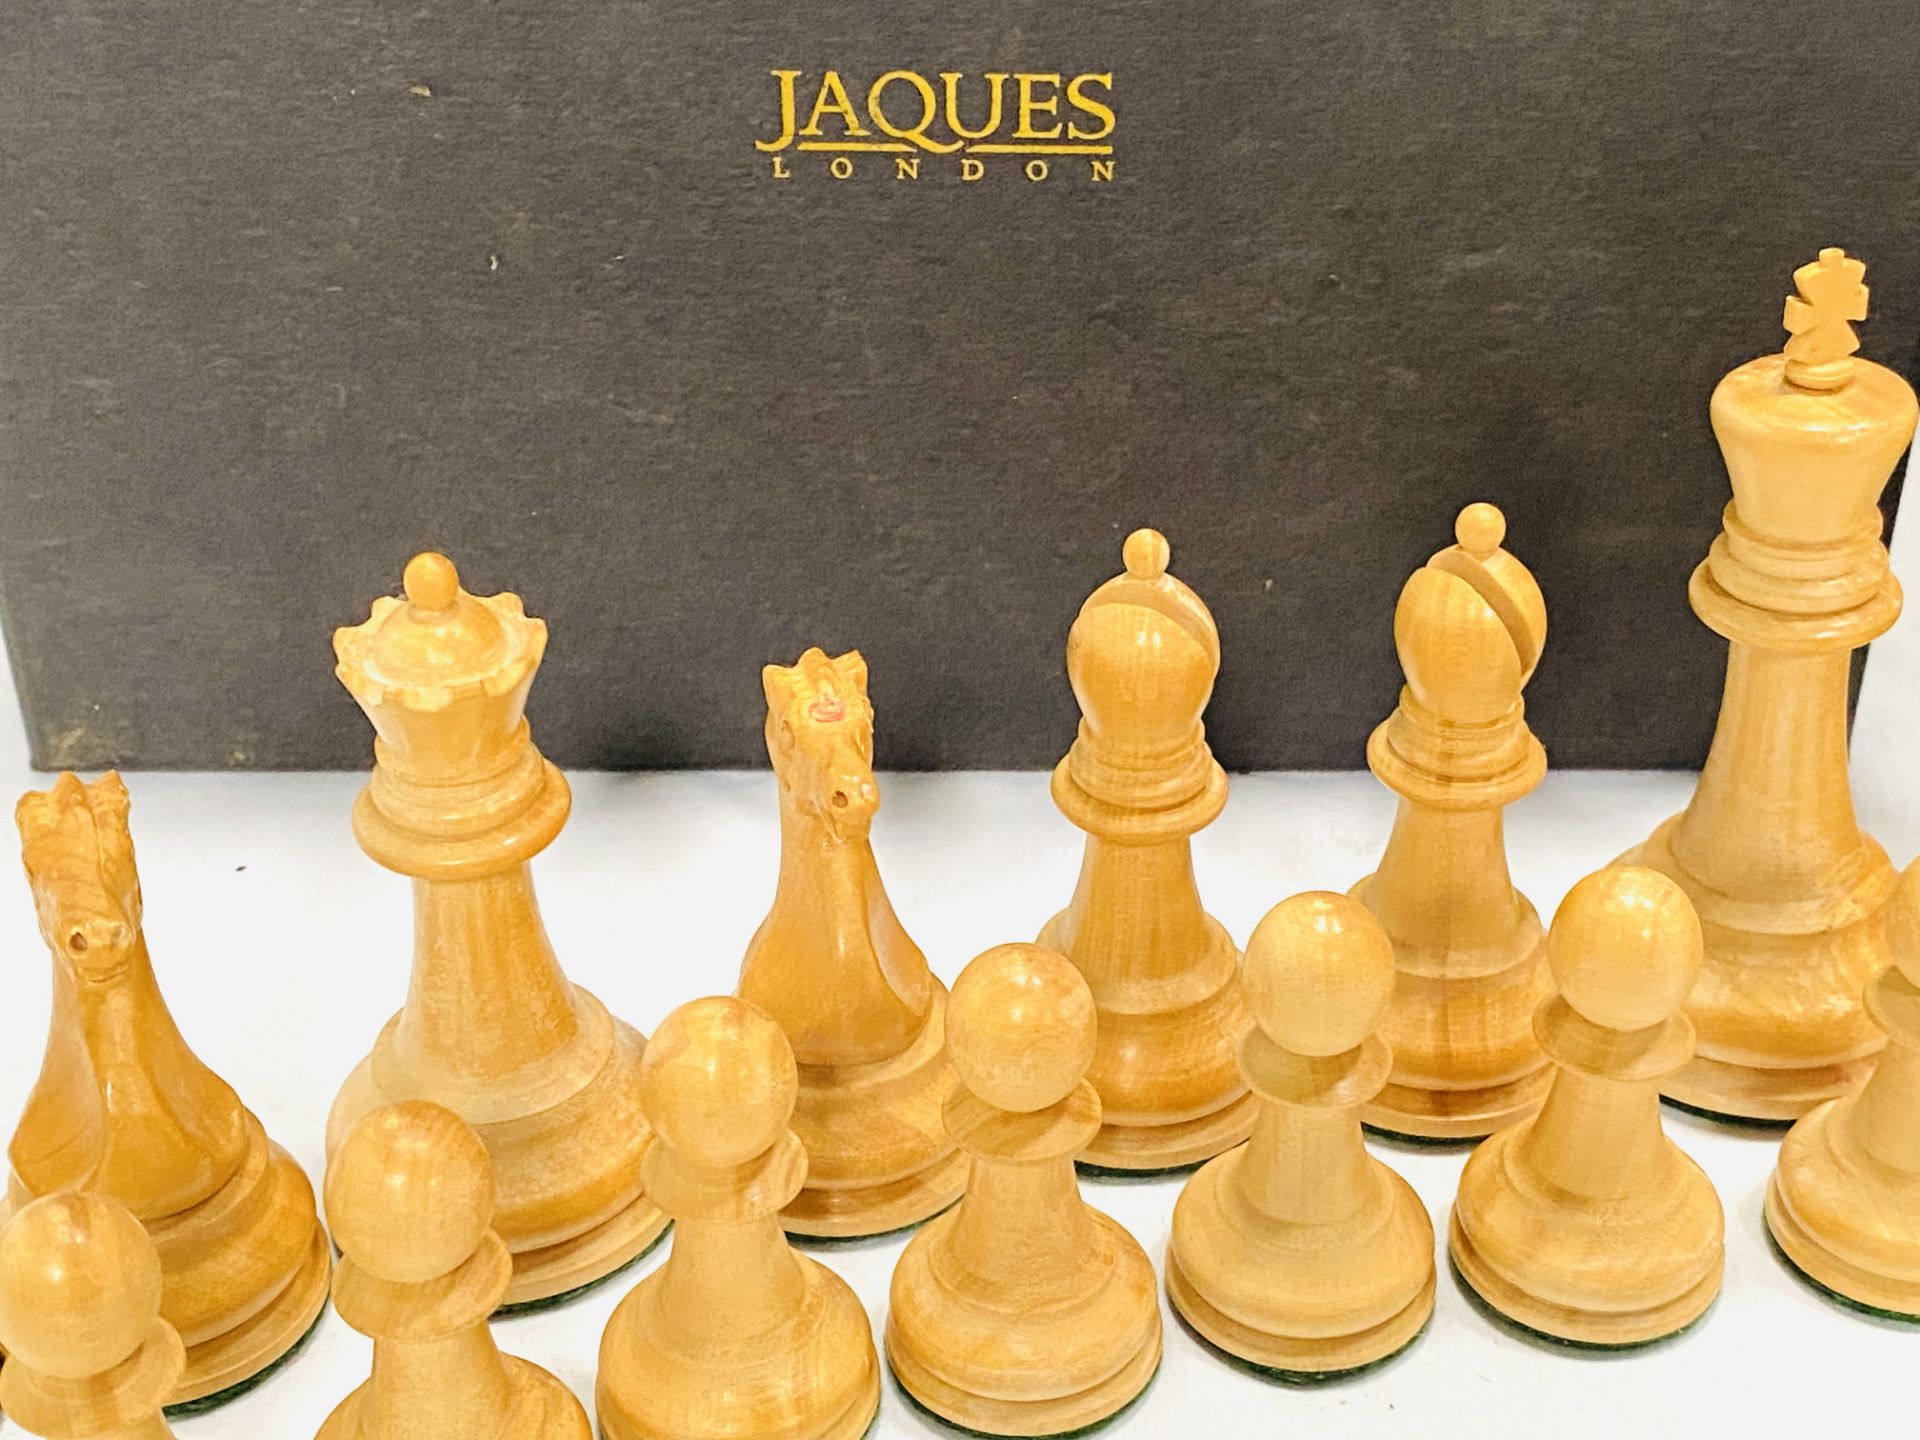 Jaques chess set - Image 4 of 6